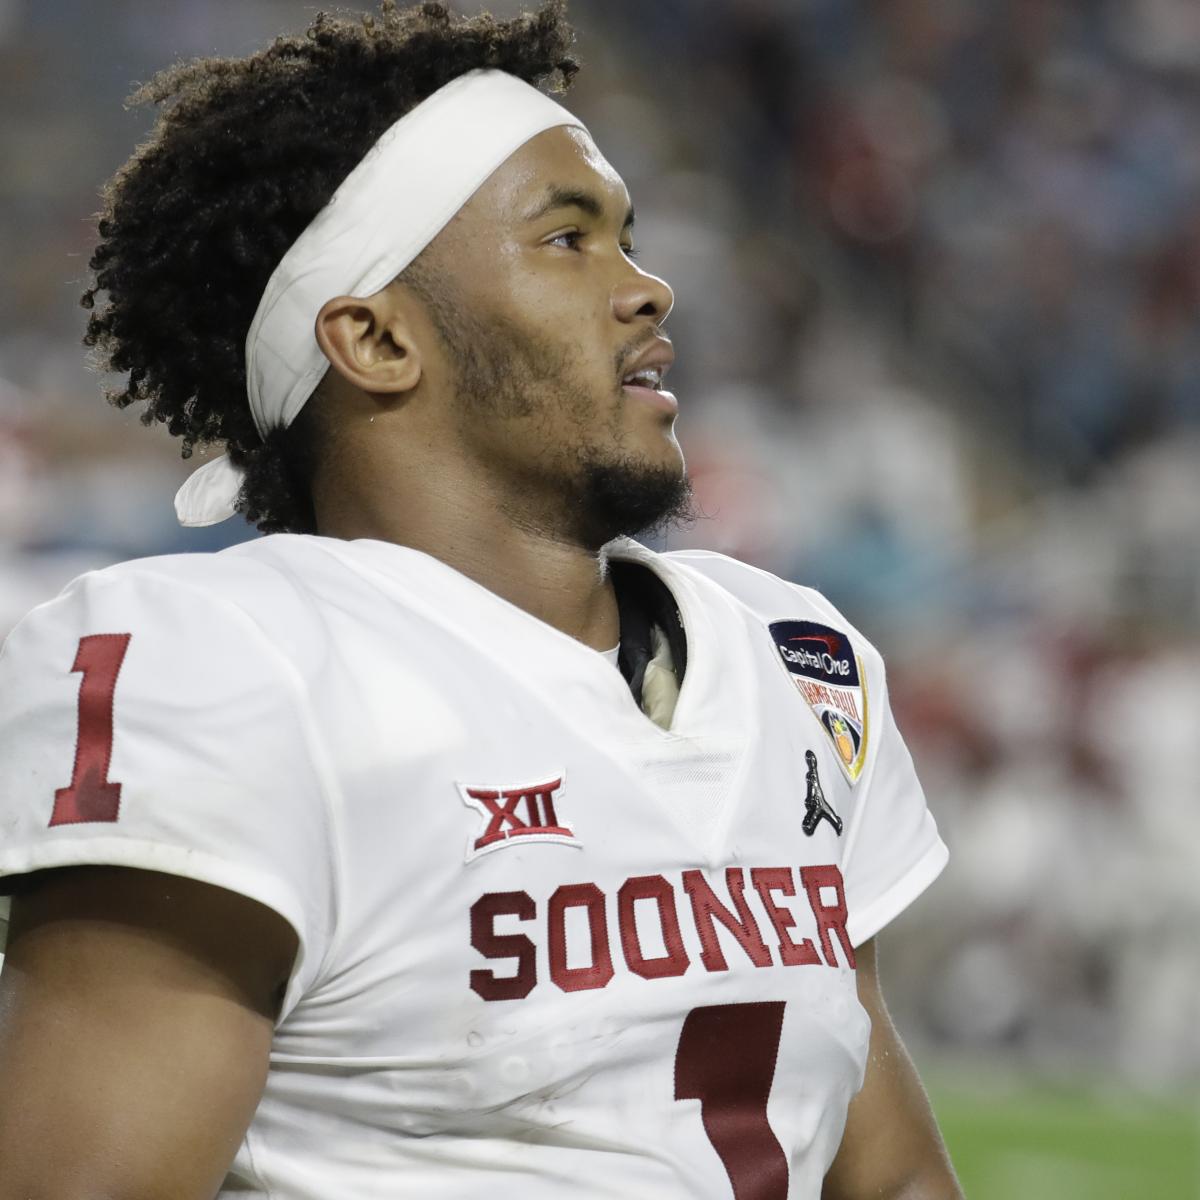 NFL Draft 2019: Mock Draft Projections and Analysis for Top Prospects